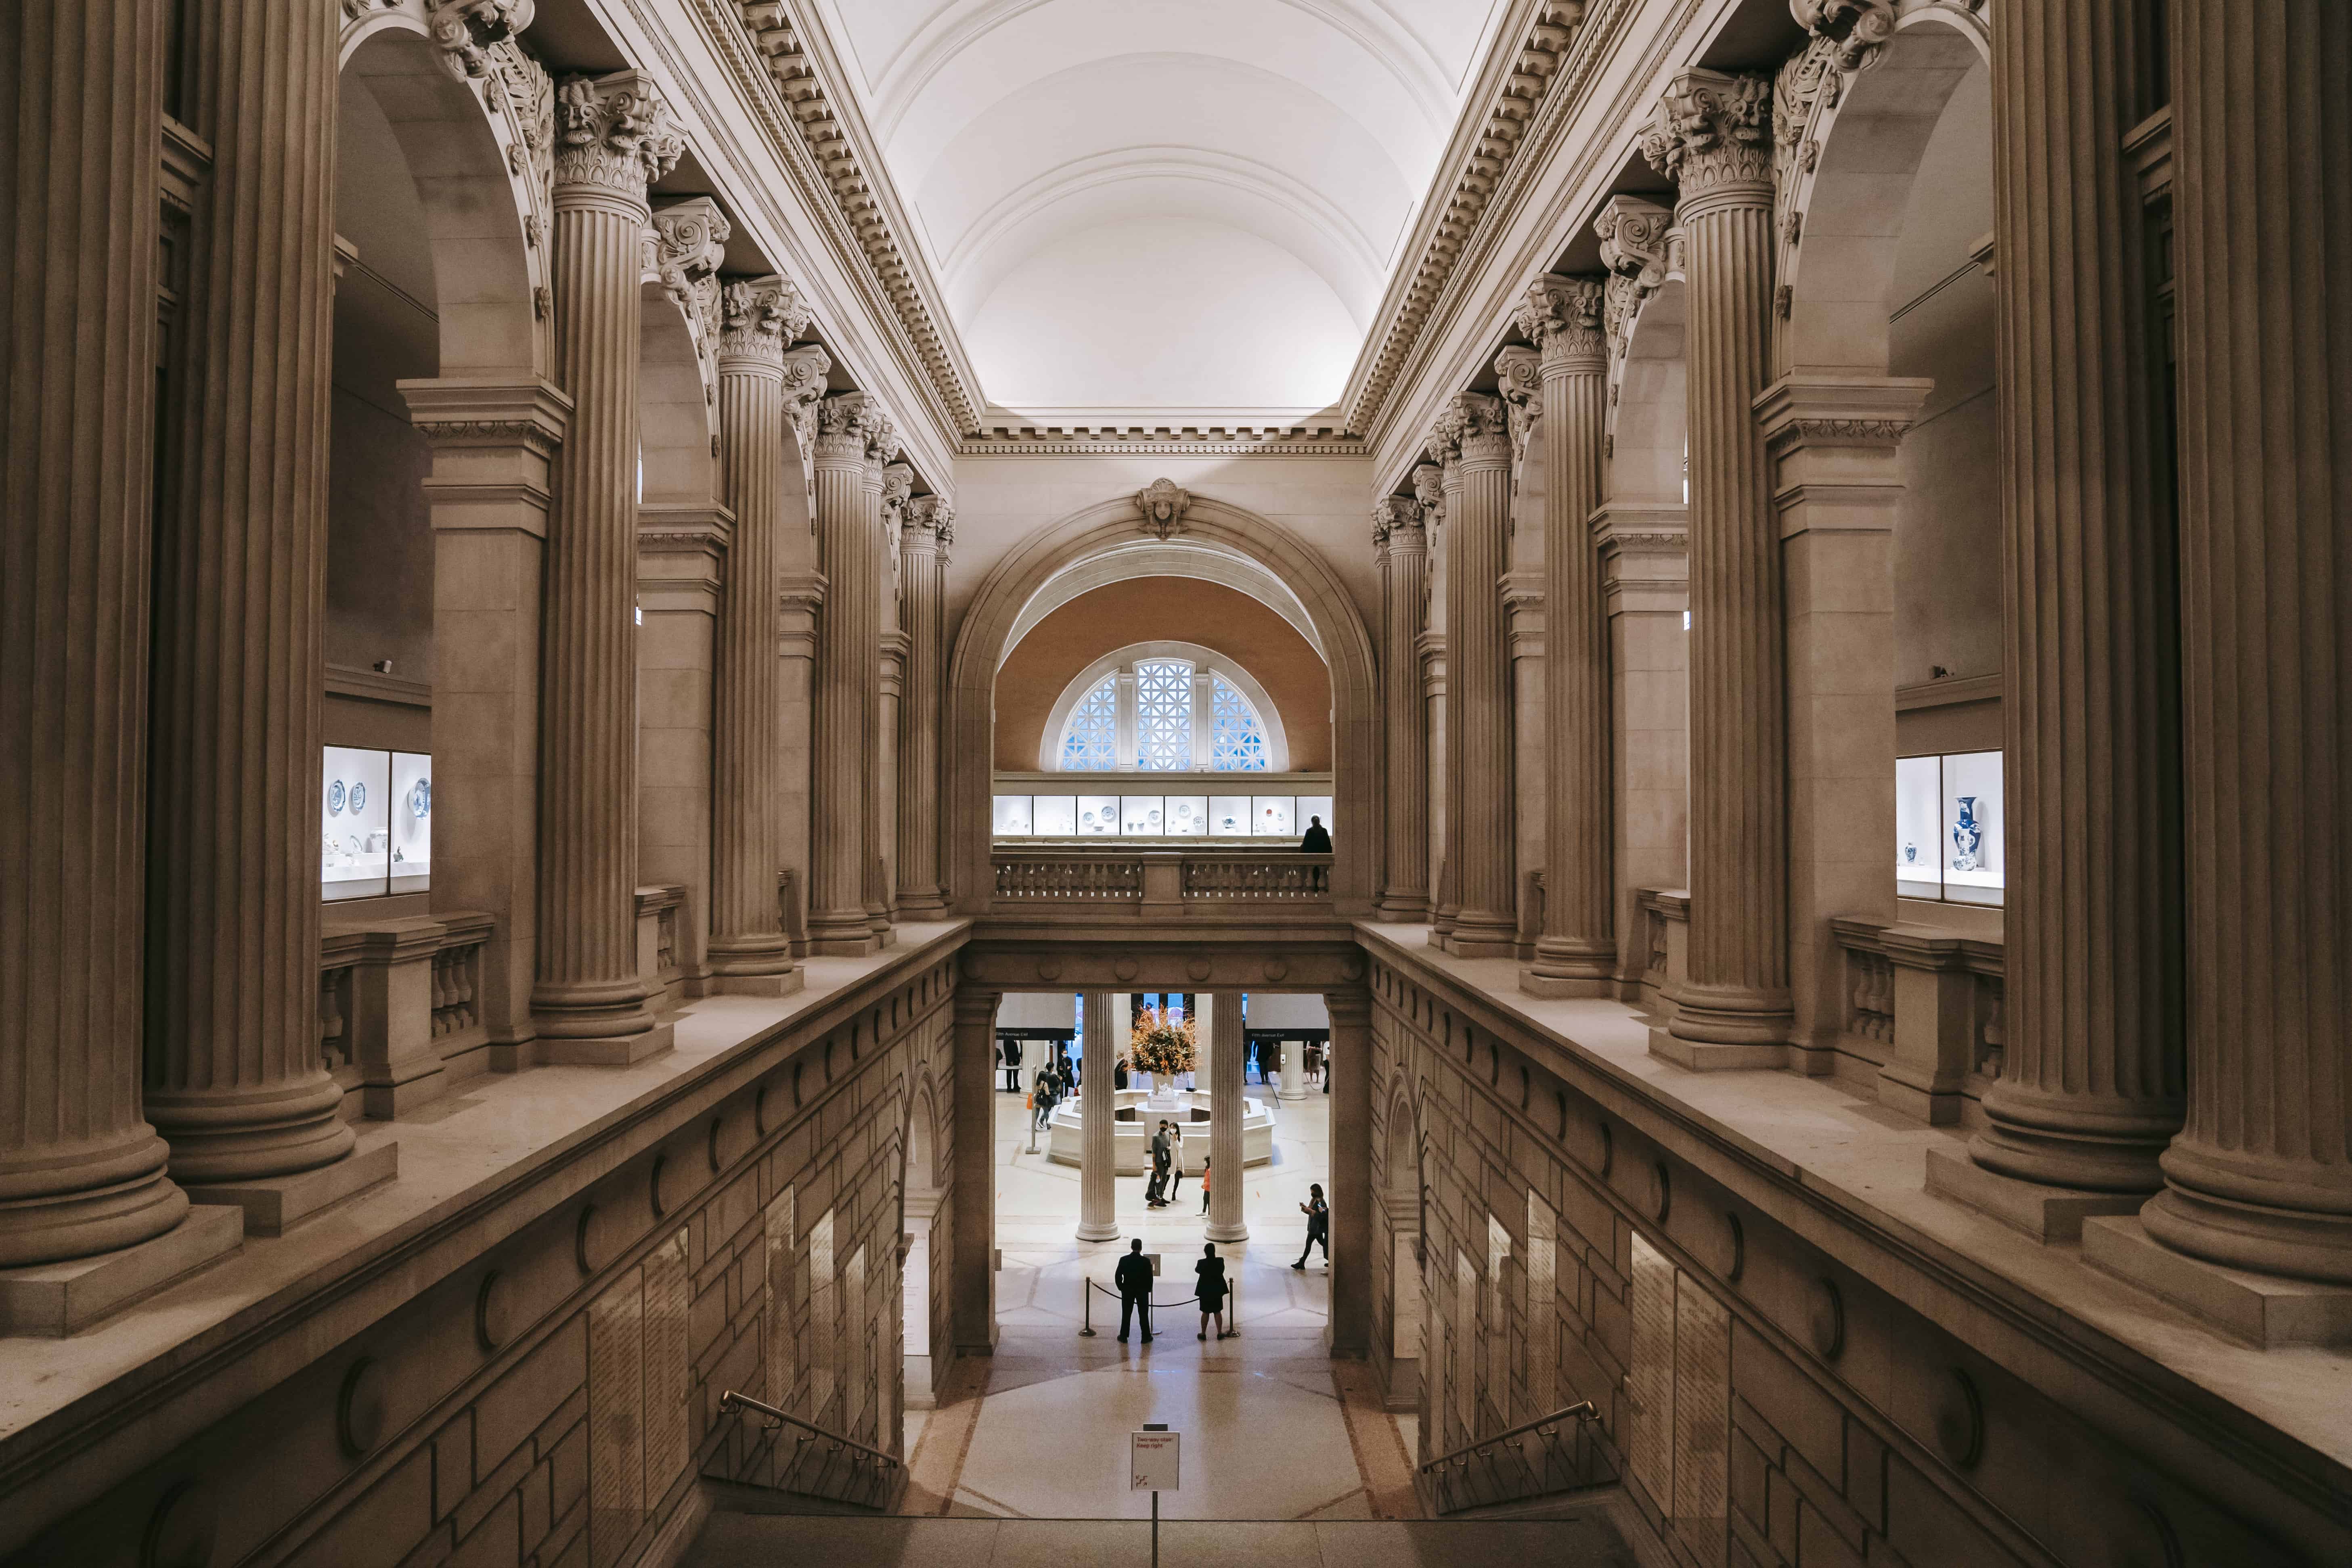 metropolitan museum in nyc, blog post about museums in nyc with free or discounted tickets for students